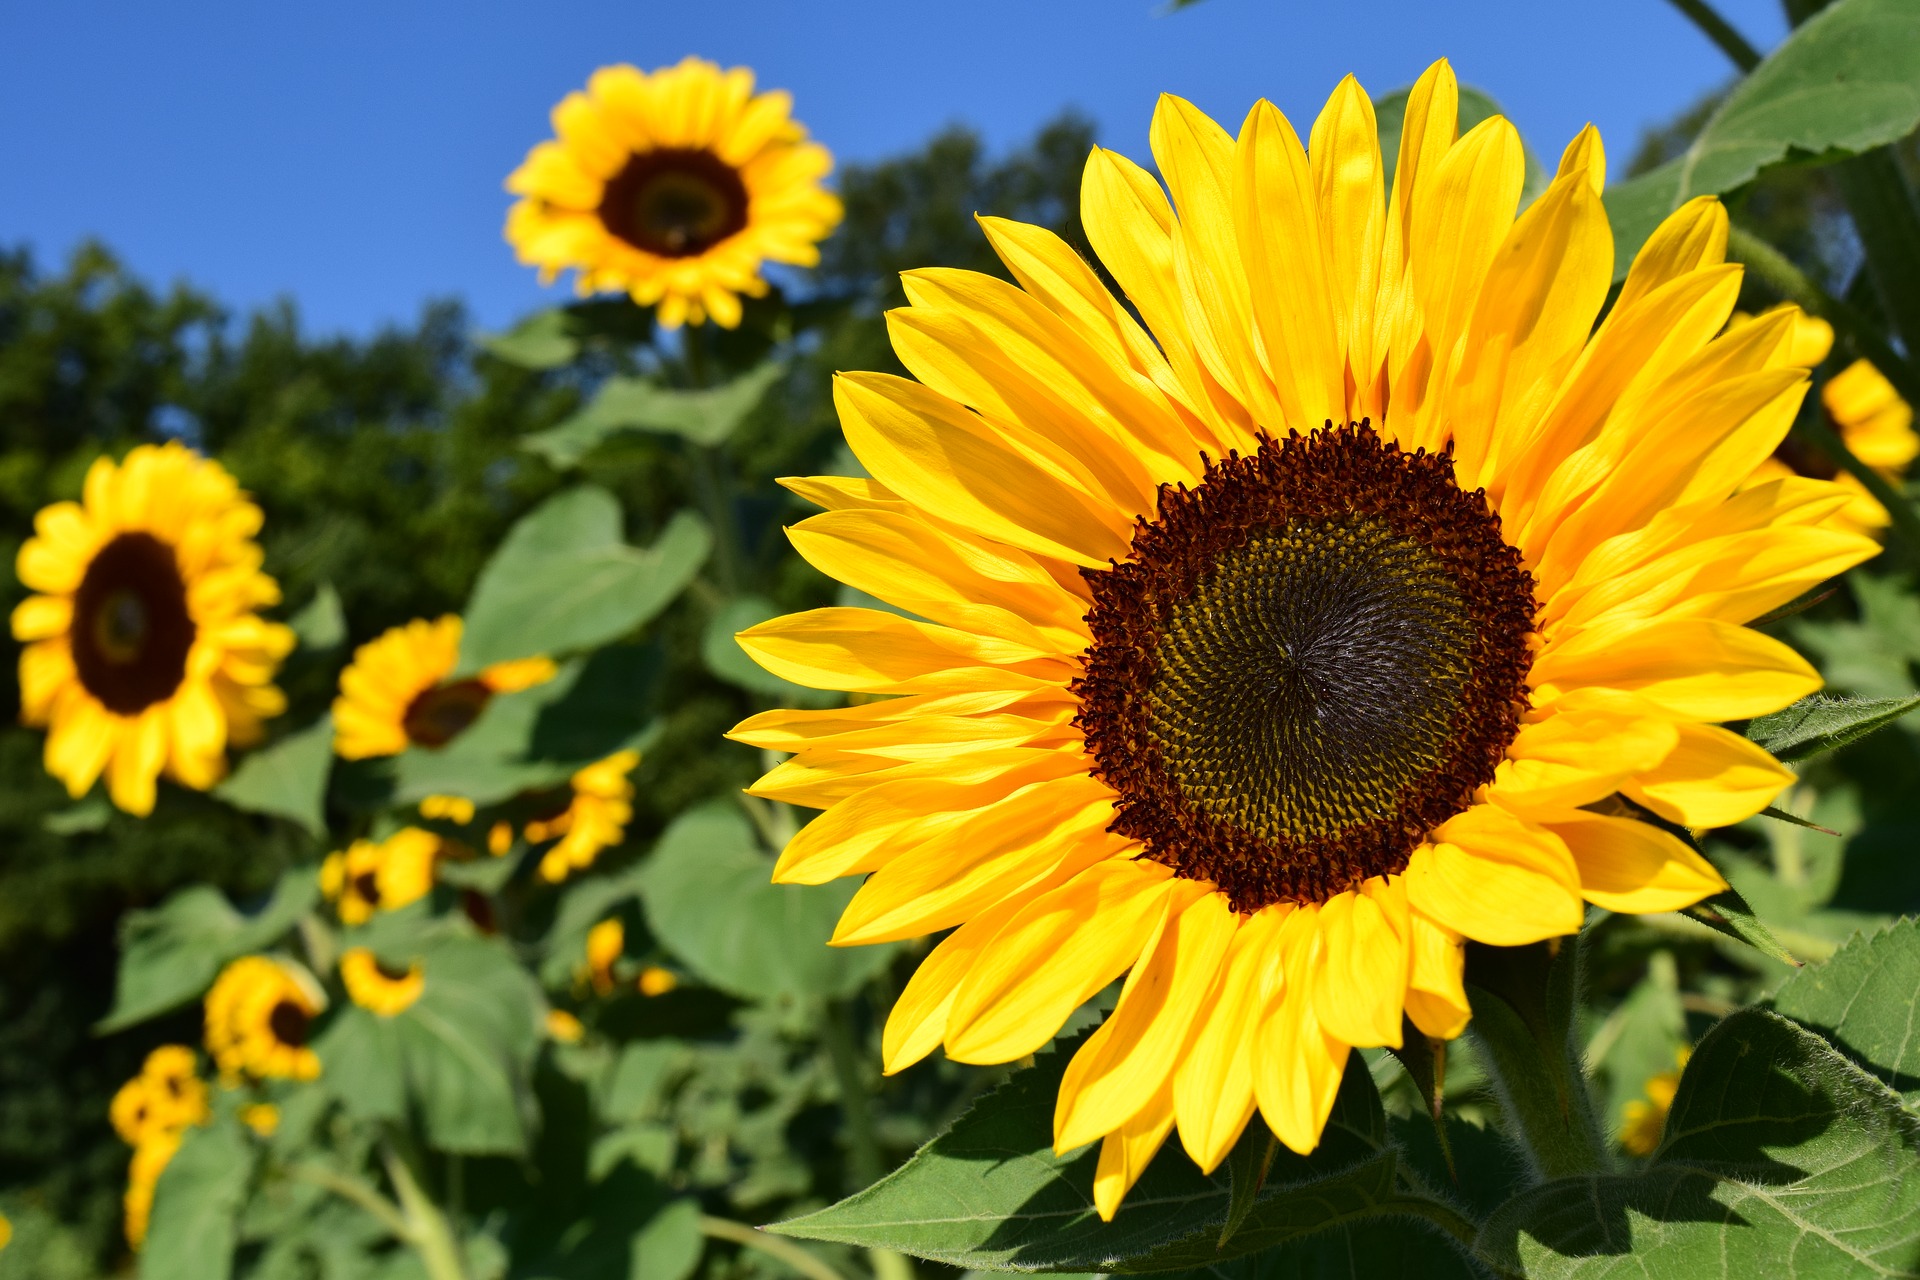 Sunflowers: How to Plant, Grow, and Care for Sunflower Plants | The ...